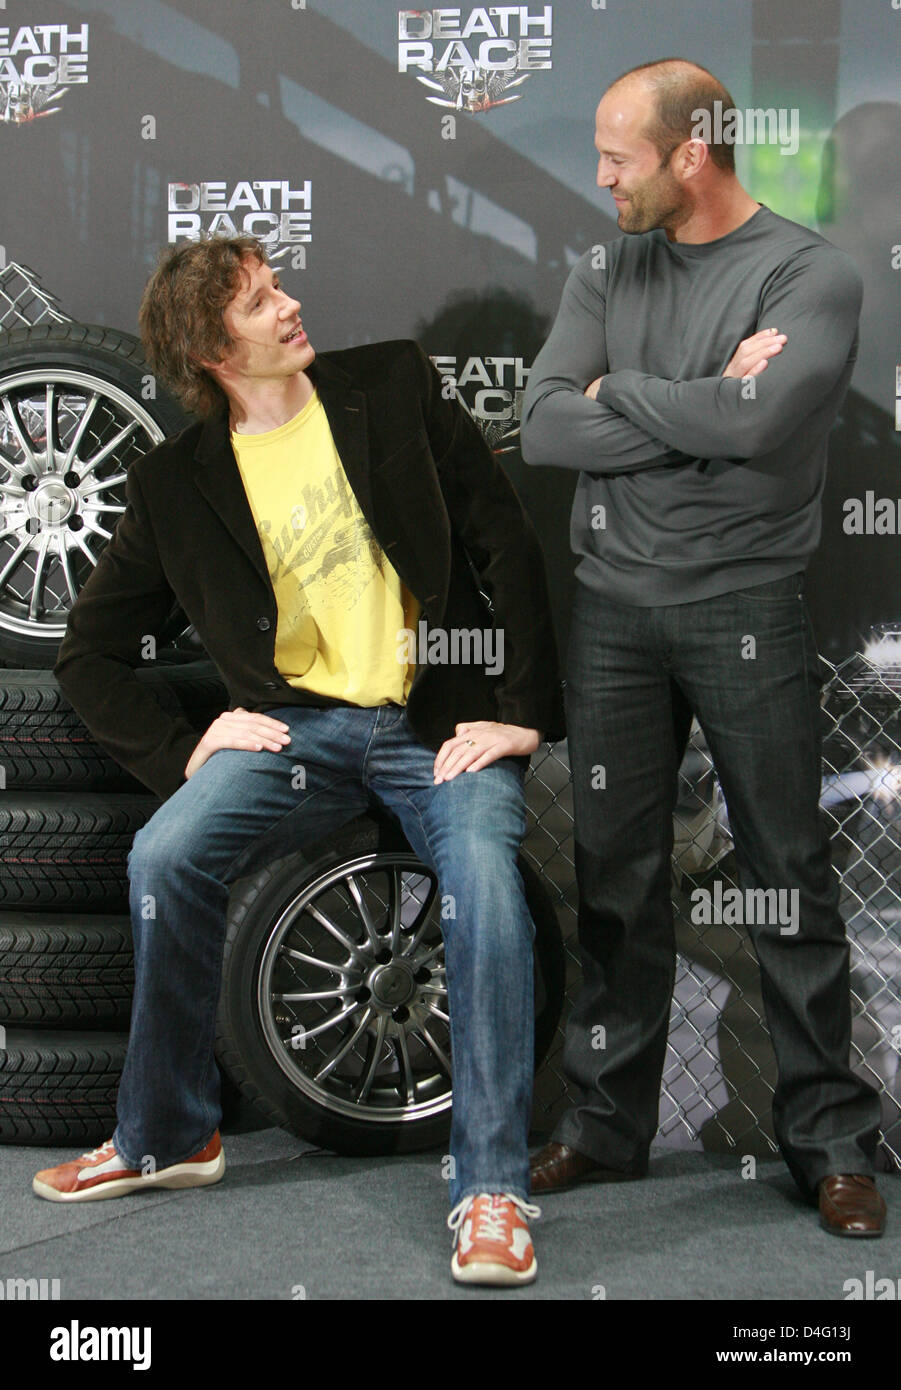 British actors Paul W.S. Anderson (L) and  Jason Statham pose during the photocall for the movie 'Death Race' in Berlin, Germany, 11 September 2008. The remake of trash classic 'Death Race 2000', in which prisoners attend a jail-race, will premiere in German cinemas on 27 November 2008. Photo: JENS KALAENE Stock Photo